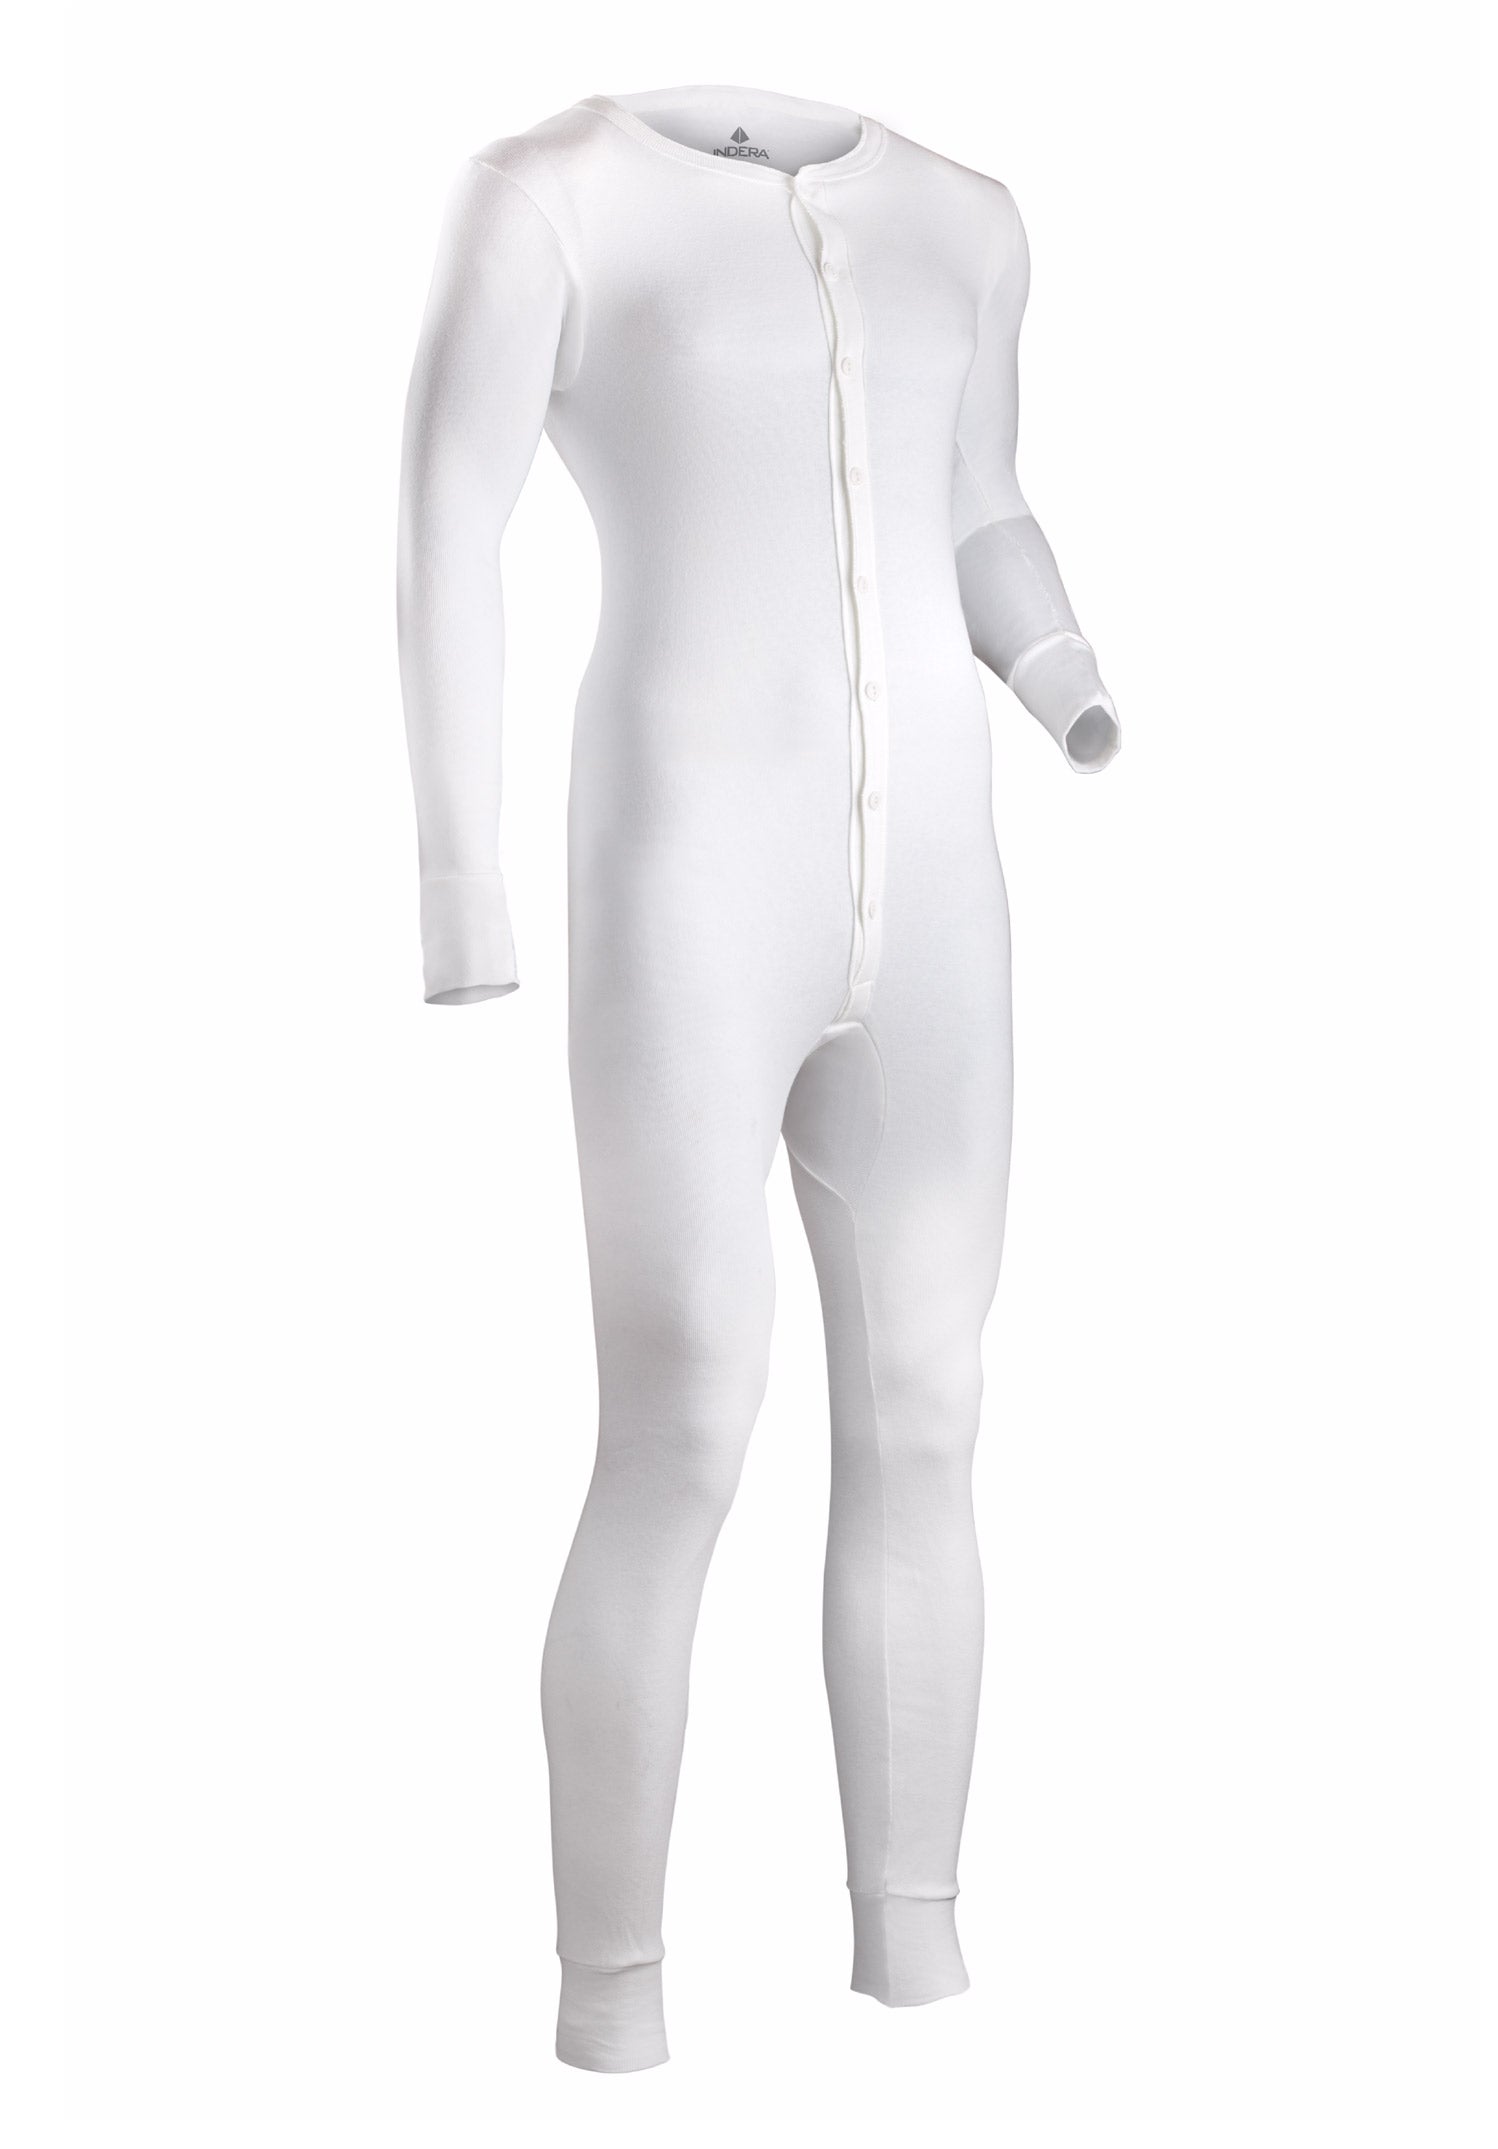 Coldmast Union Suits in White - 860-T - Tall Man Sizes